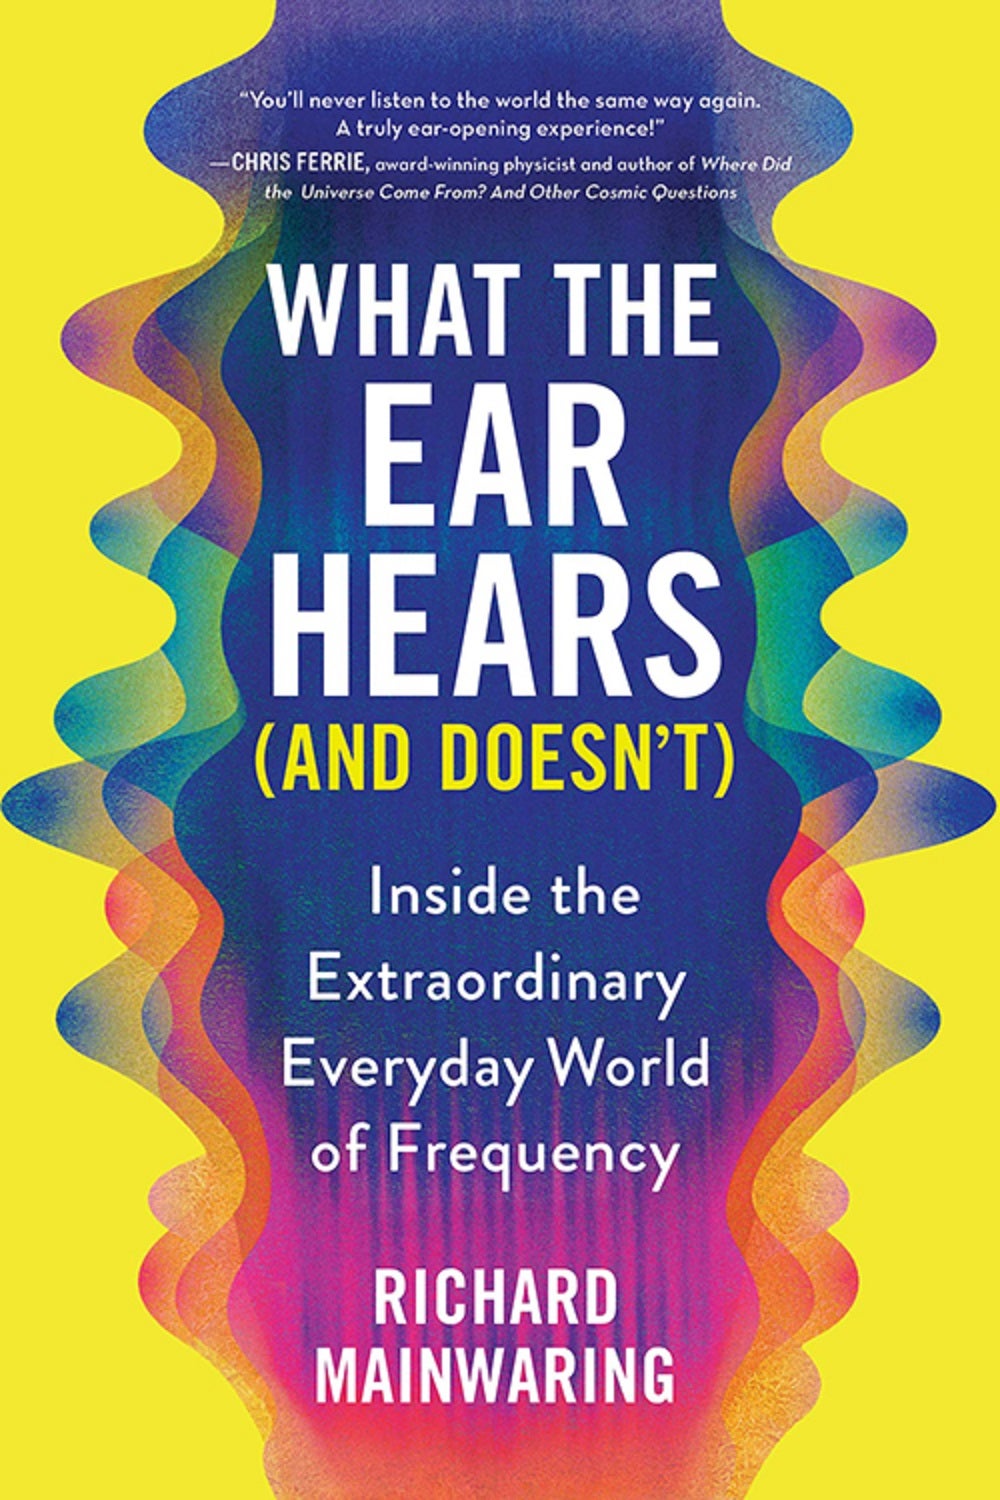 Book cover for What the Ear Hears and Doesn't in yellow with multicolored soundwaves